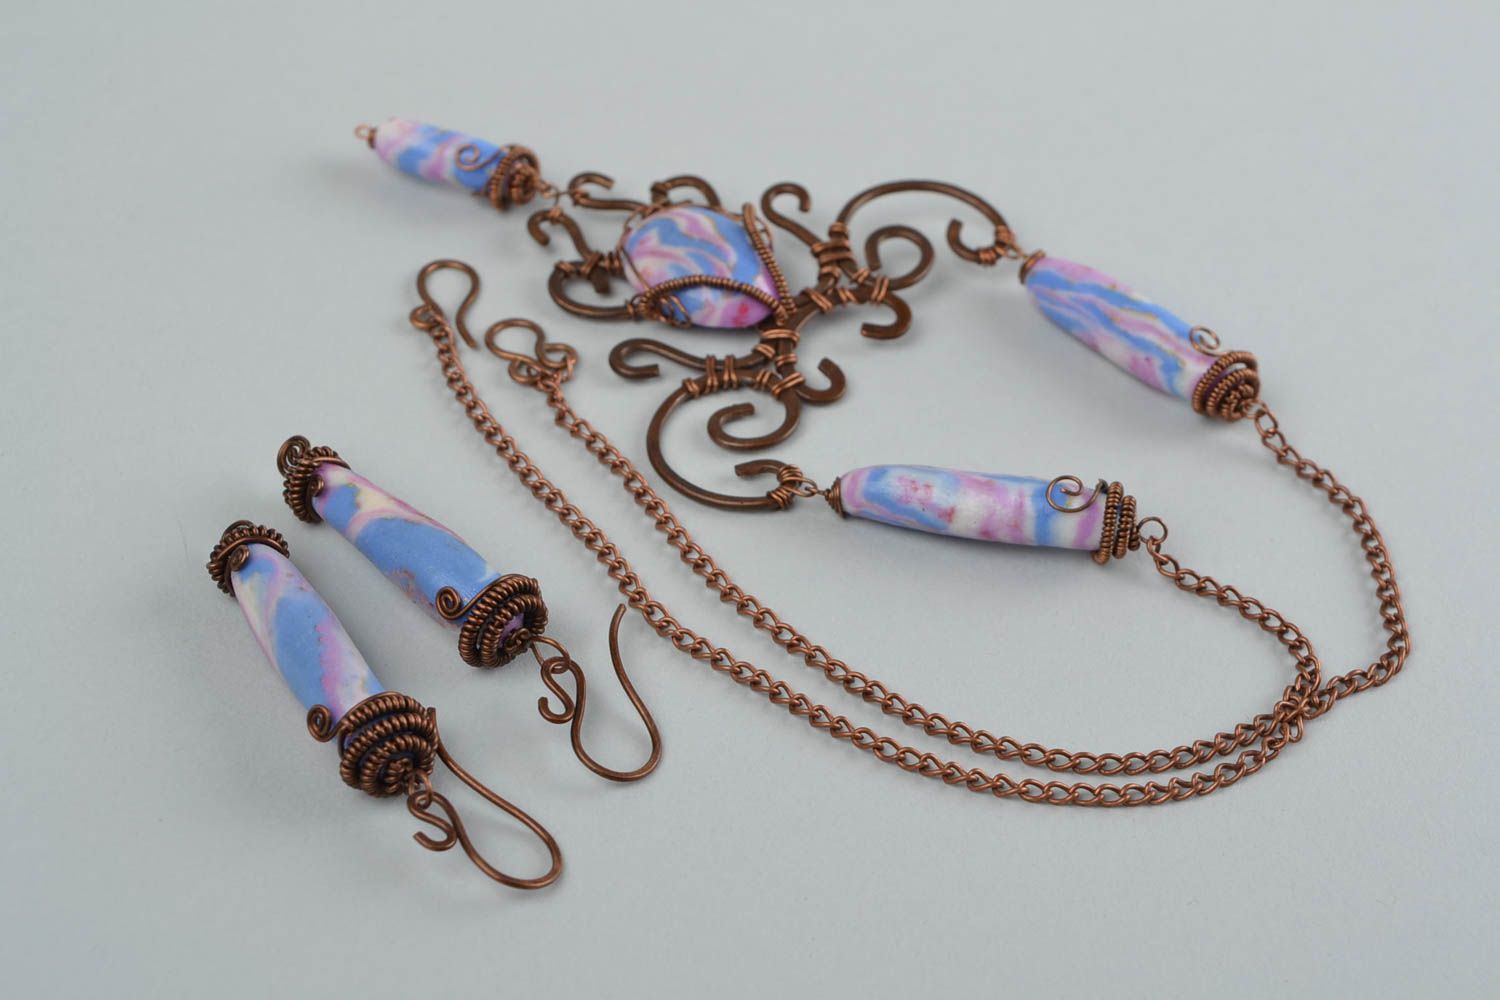 Earrings and pendant made of copper and polymer clay using wire wrap technique photo 4